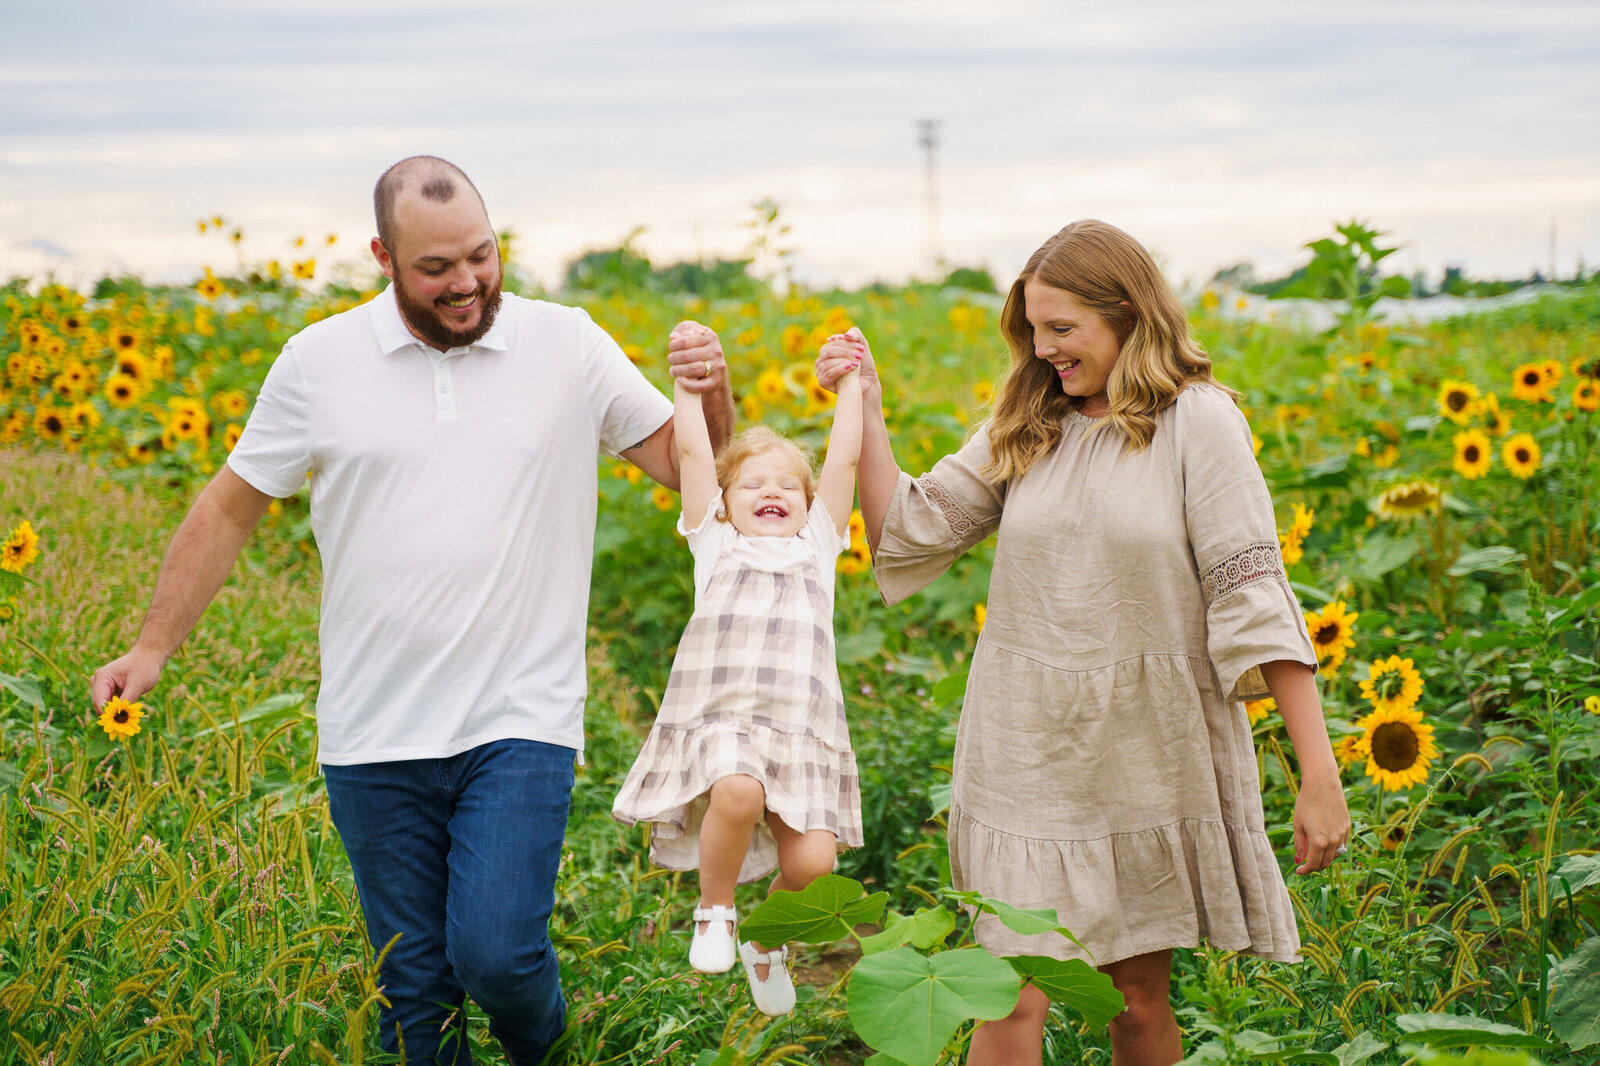 Parents swings their daughter and laughing in a patch of sunflowers at Lynd Fruit Farm in Pataskala, Ohio.